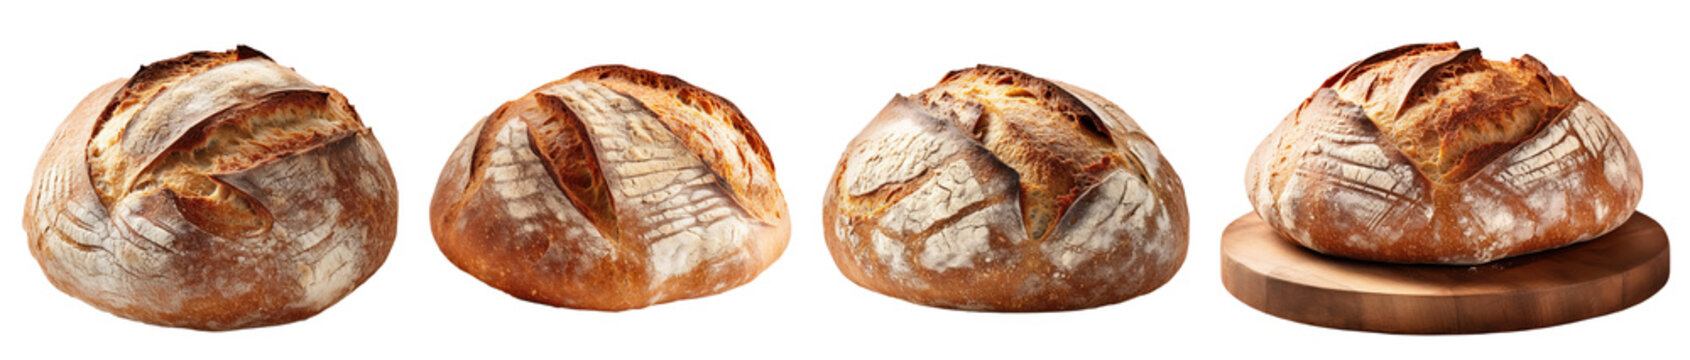 artisanal sourdough loaves of bread front view isolated on a transparent background